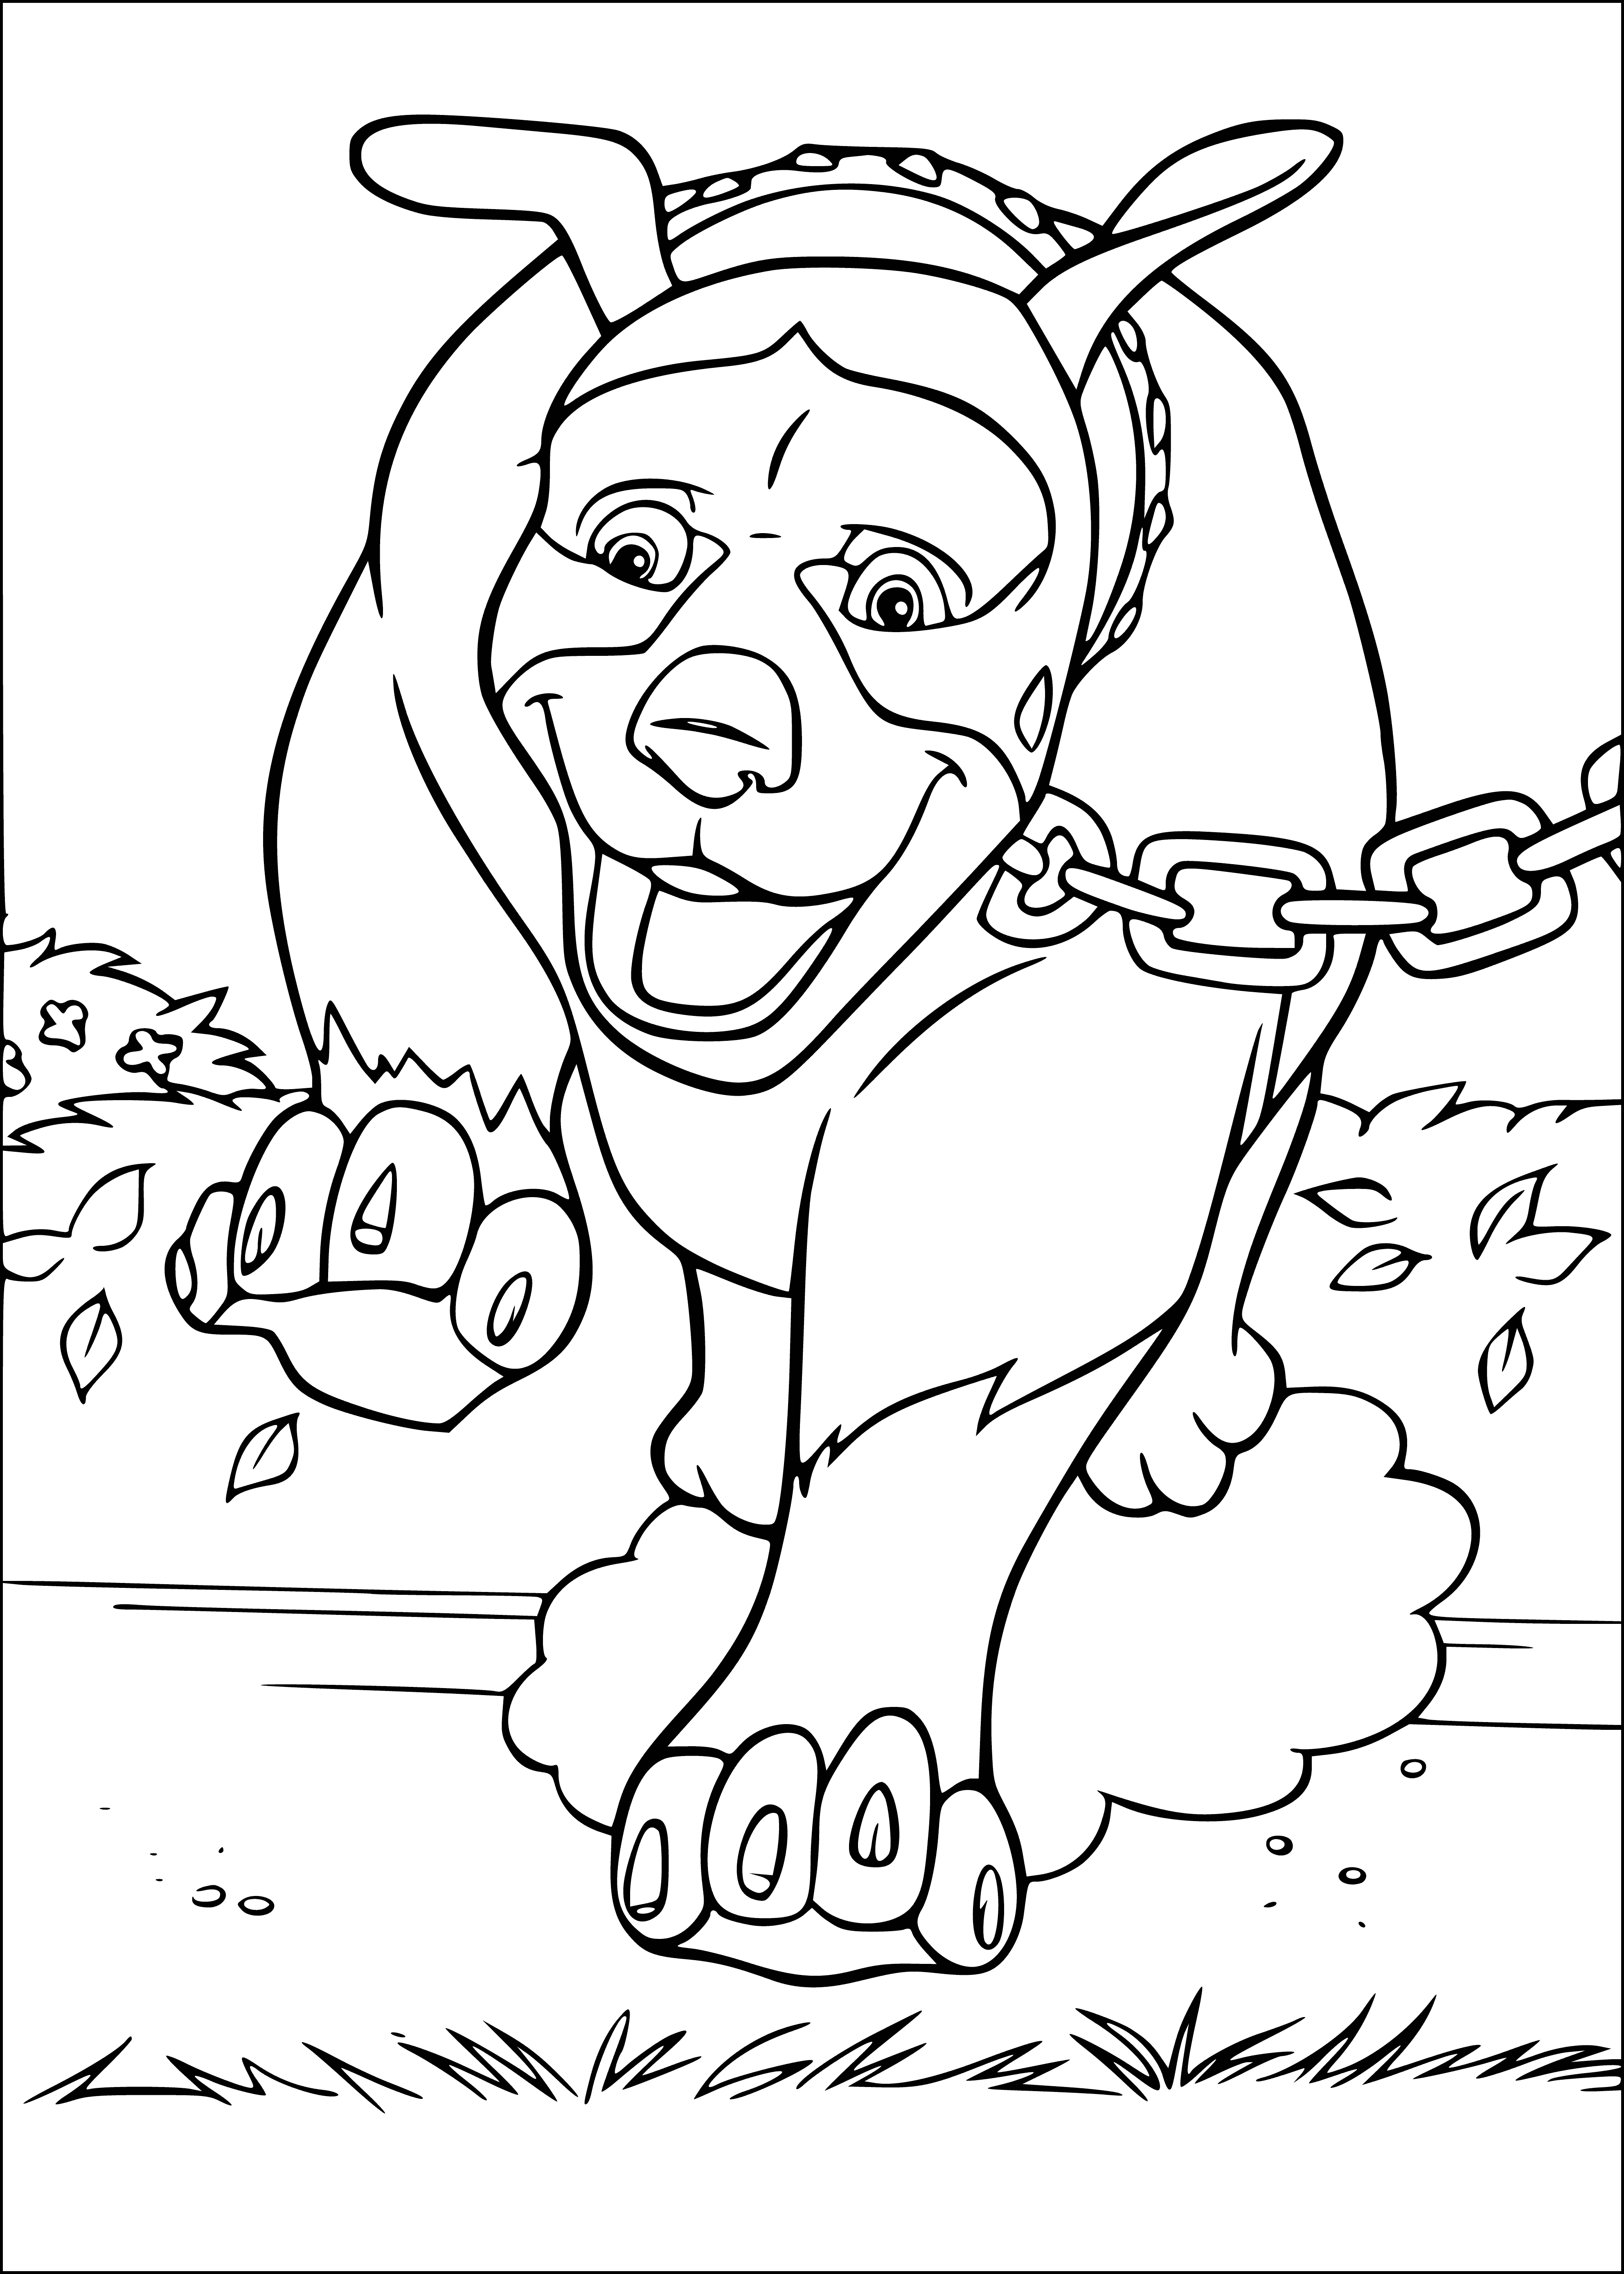 coloring page: Big dog in grassy field, brown and white, standing with a tree behind. #coloringpage